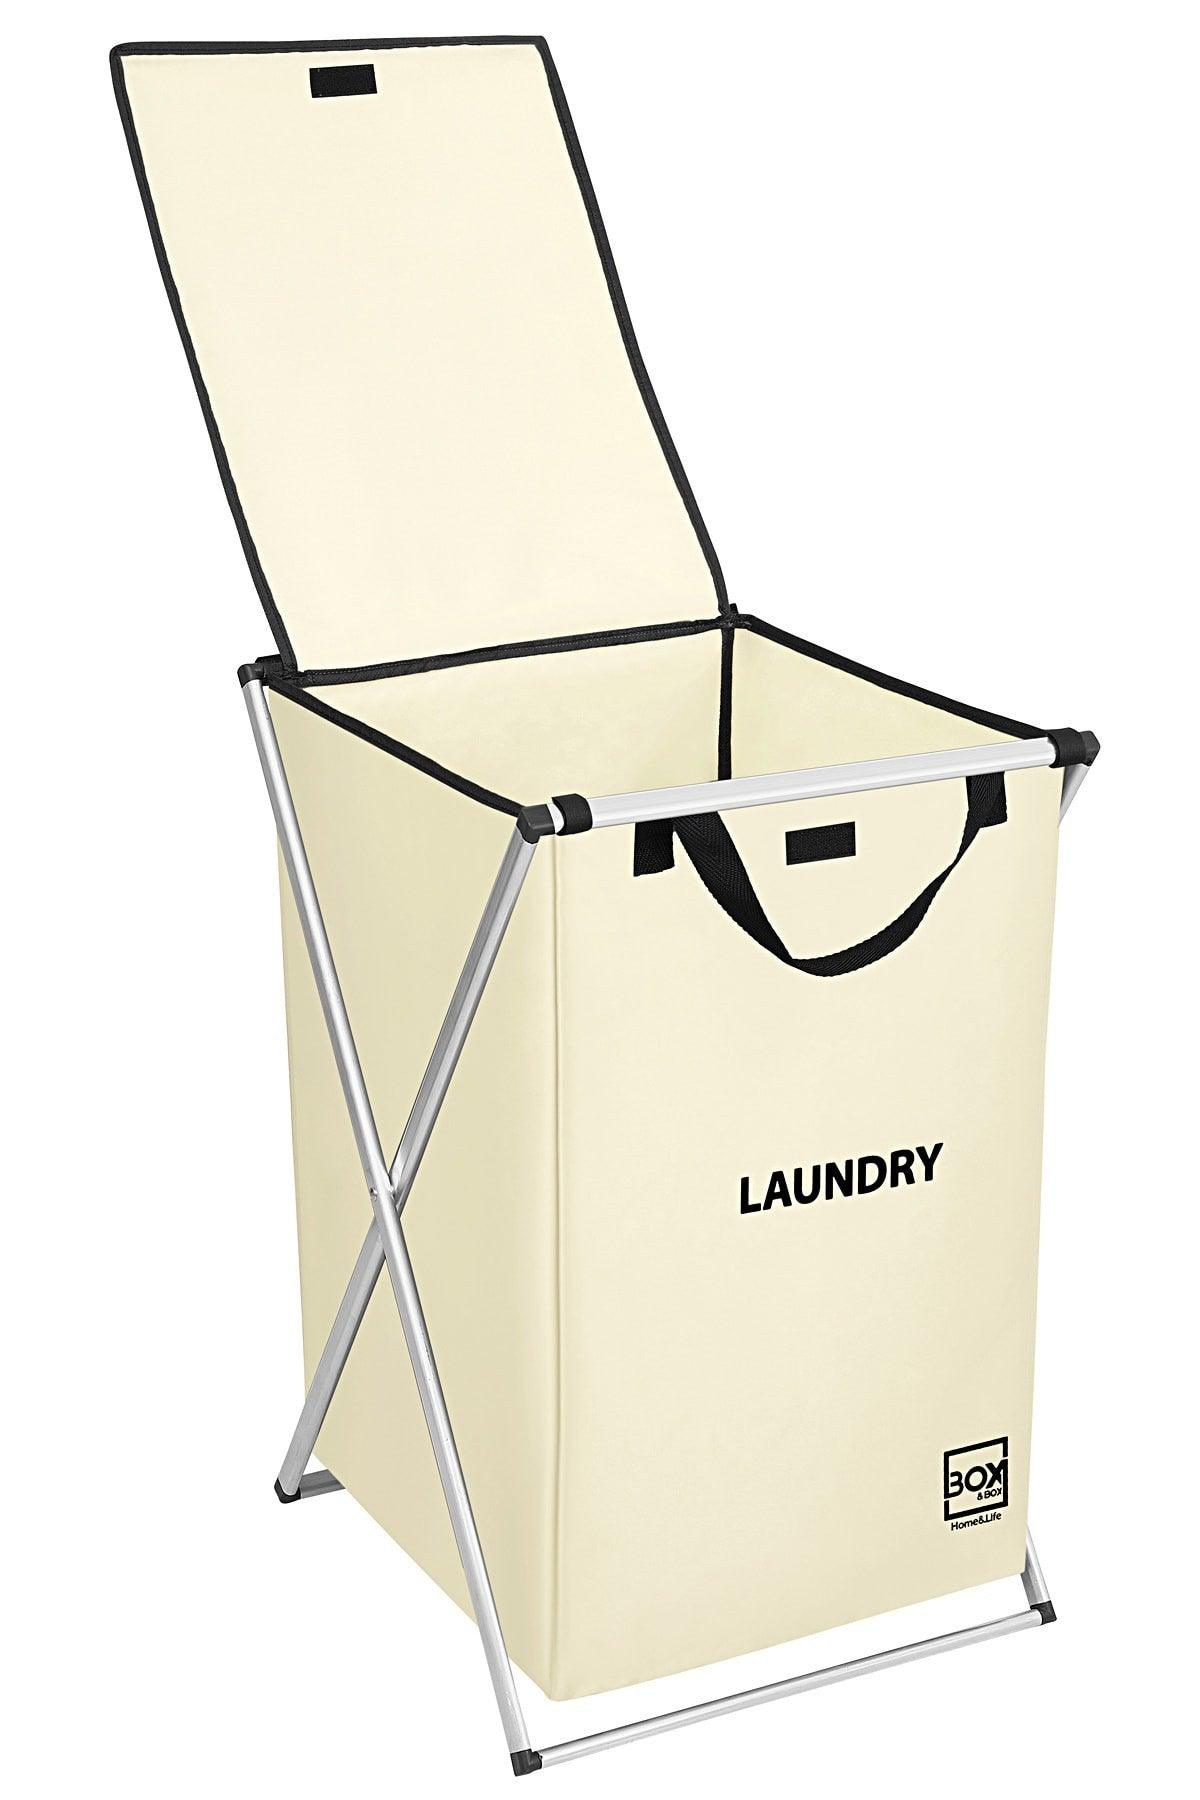 Single Compartment Laundry And Dirty Basket, Cream, Machine Washable Fabric Bag, 39x42x58 Cm - Swordslife